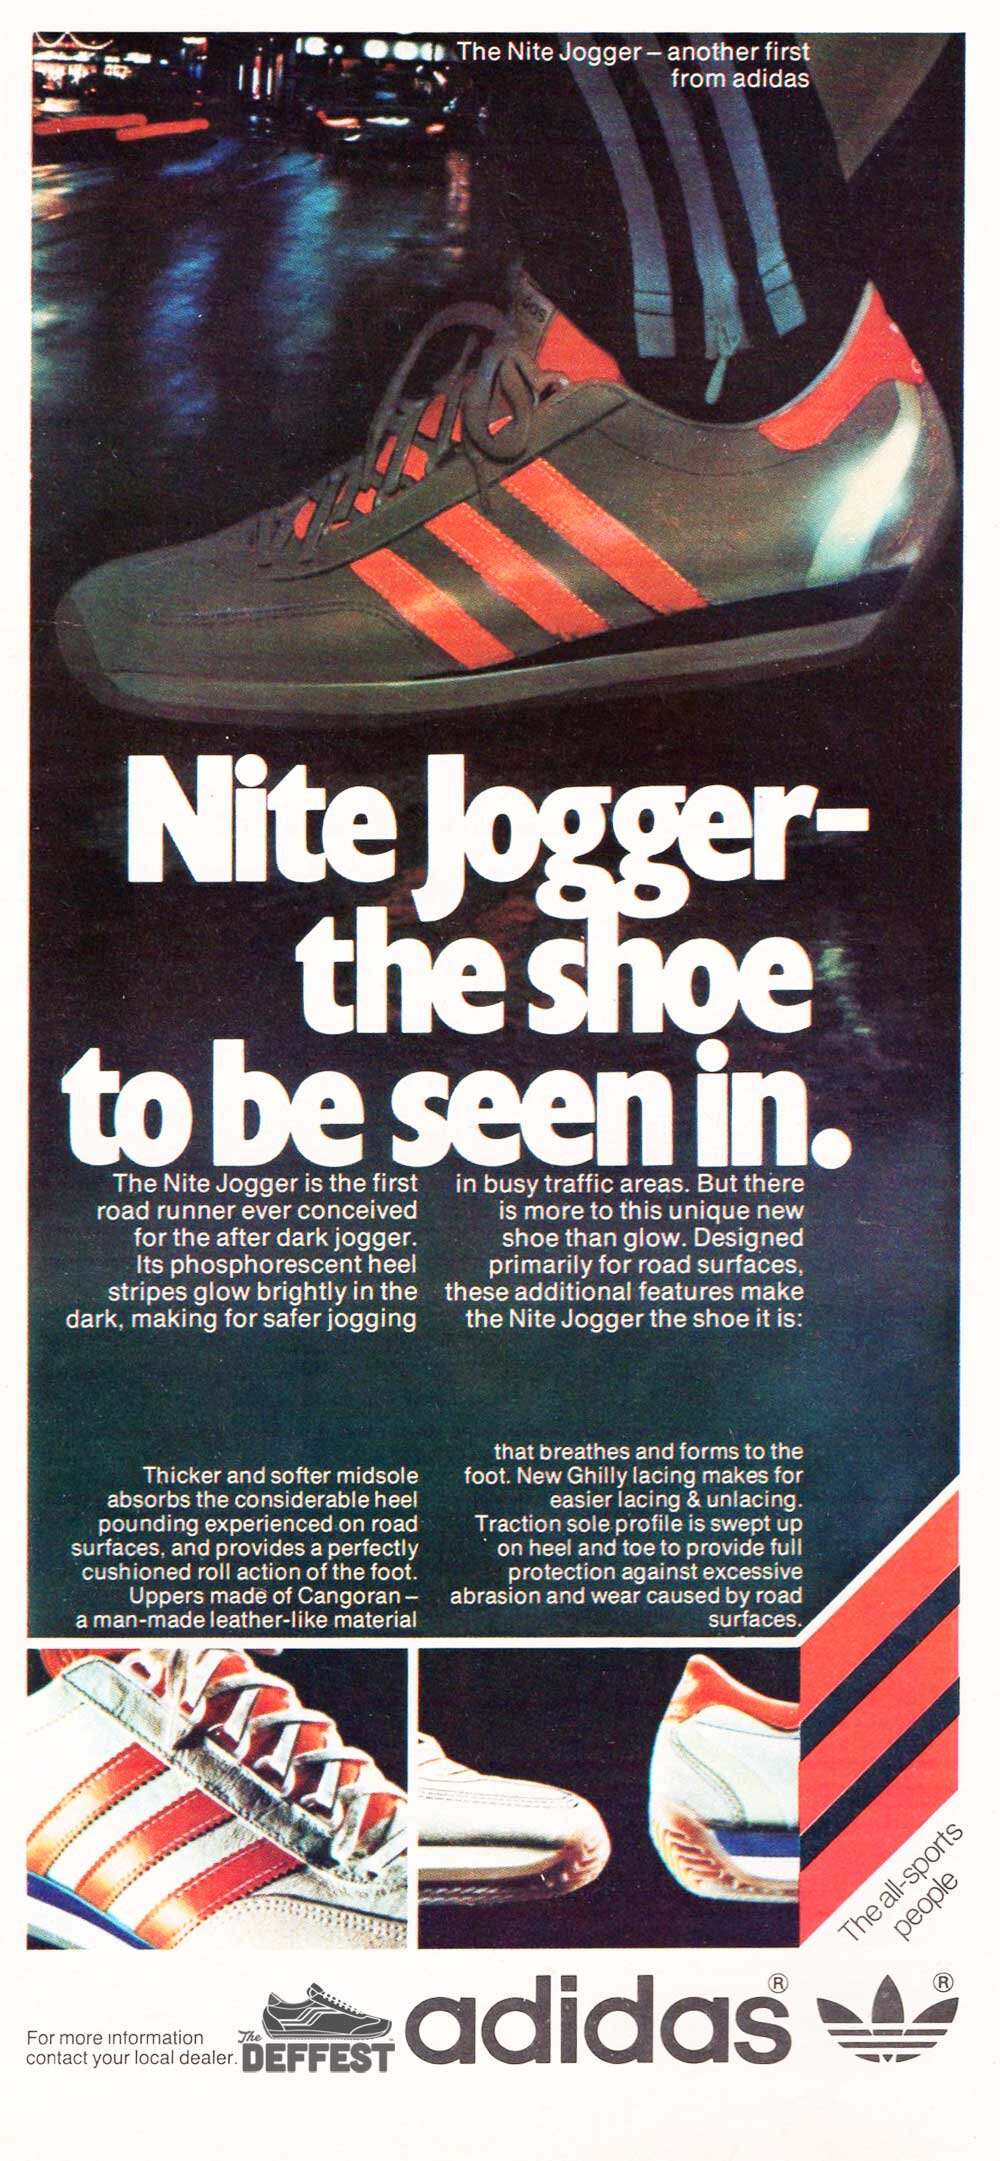 The Deffest®. A vintage and retro sneaker — Nite Jogger 1977 vintage sneaker